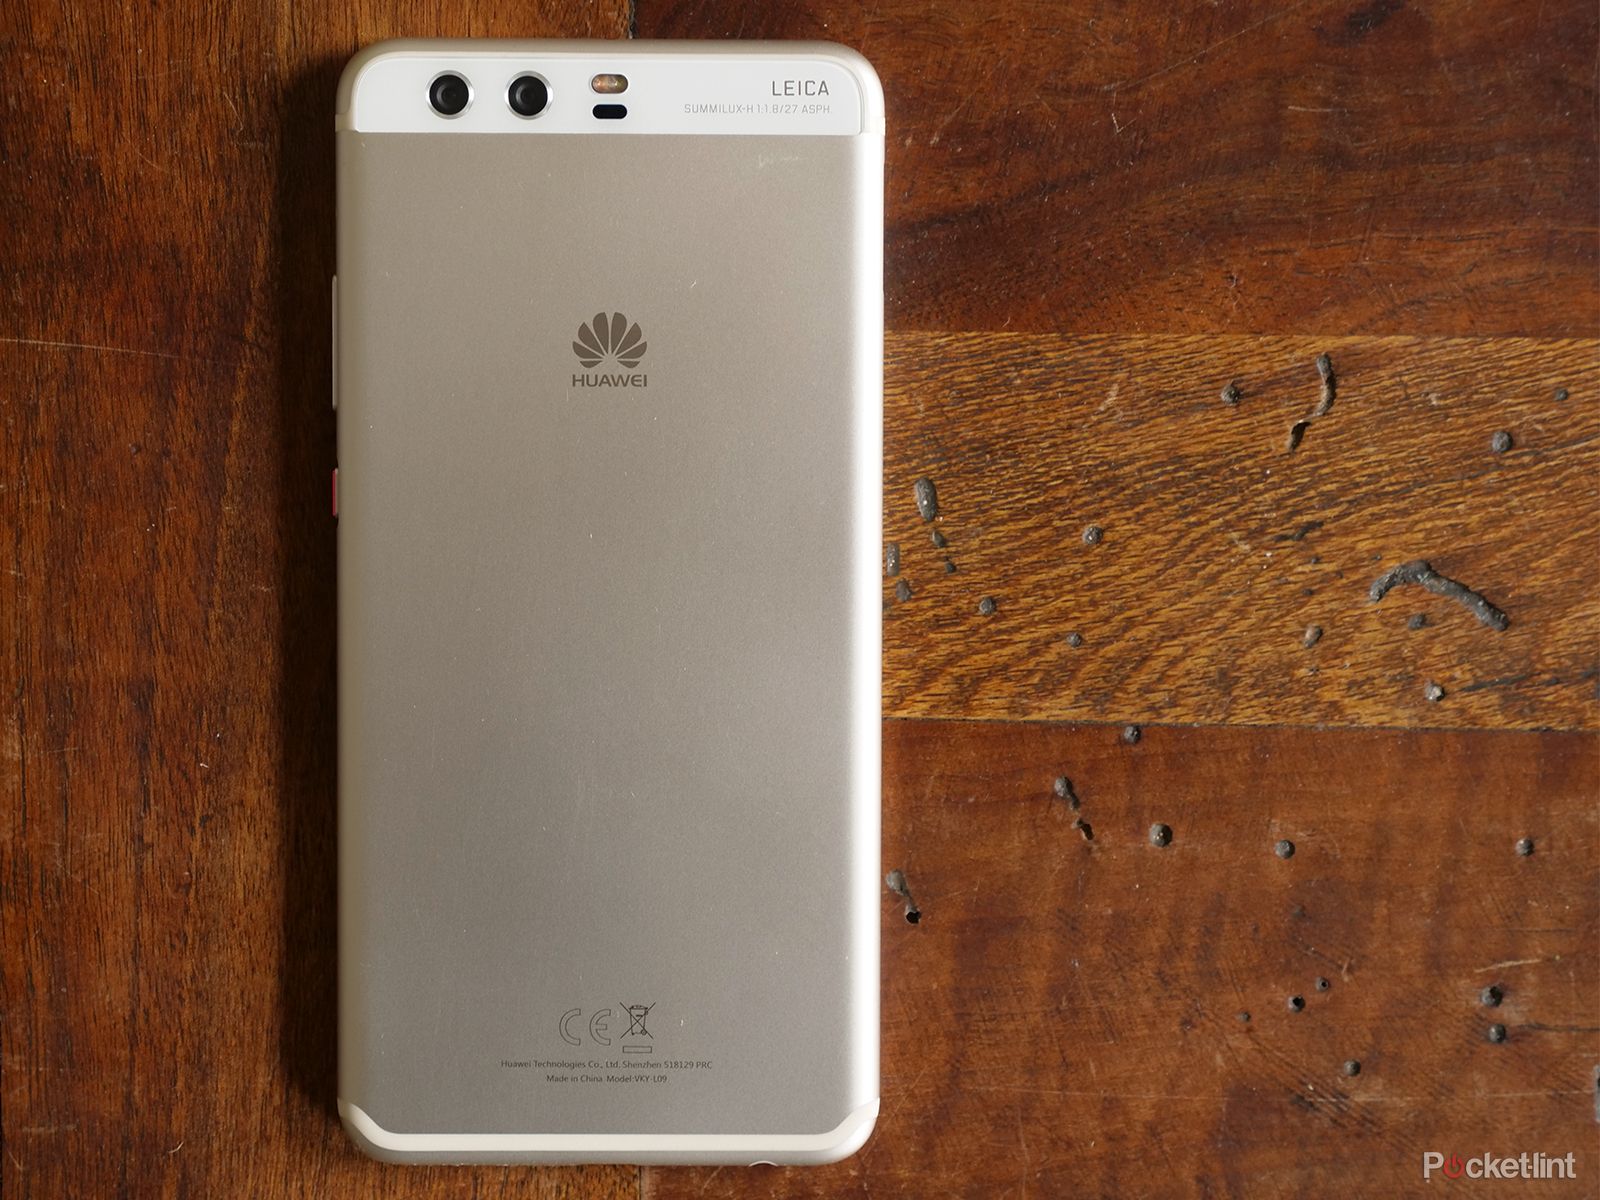 Huawei PCE Series smartphone could be the best camera phone yet image 1